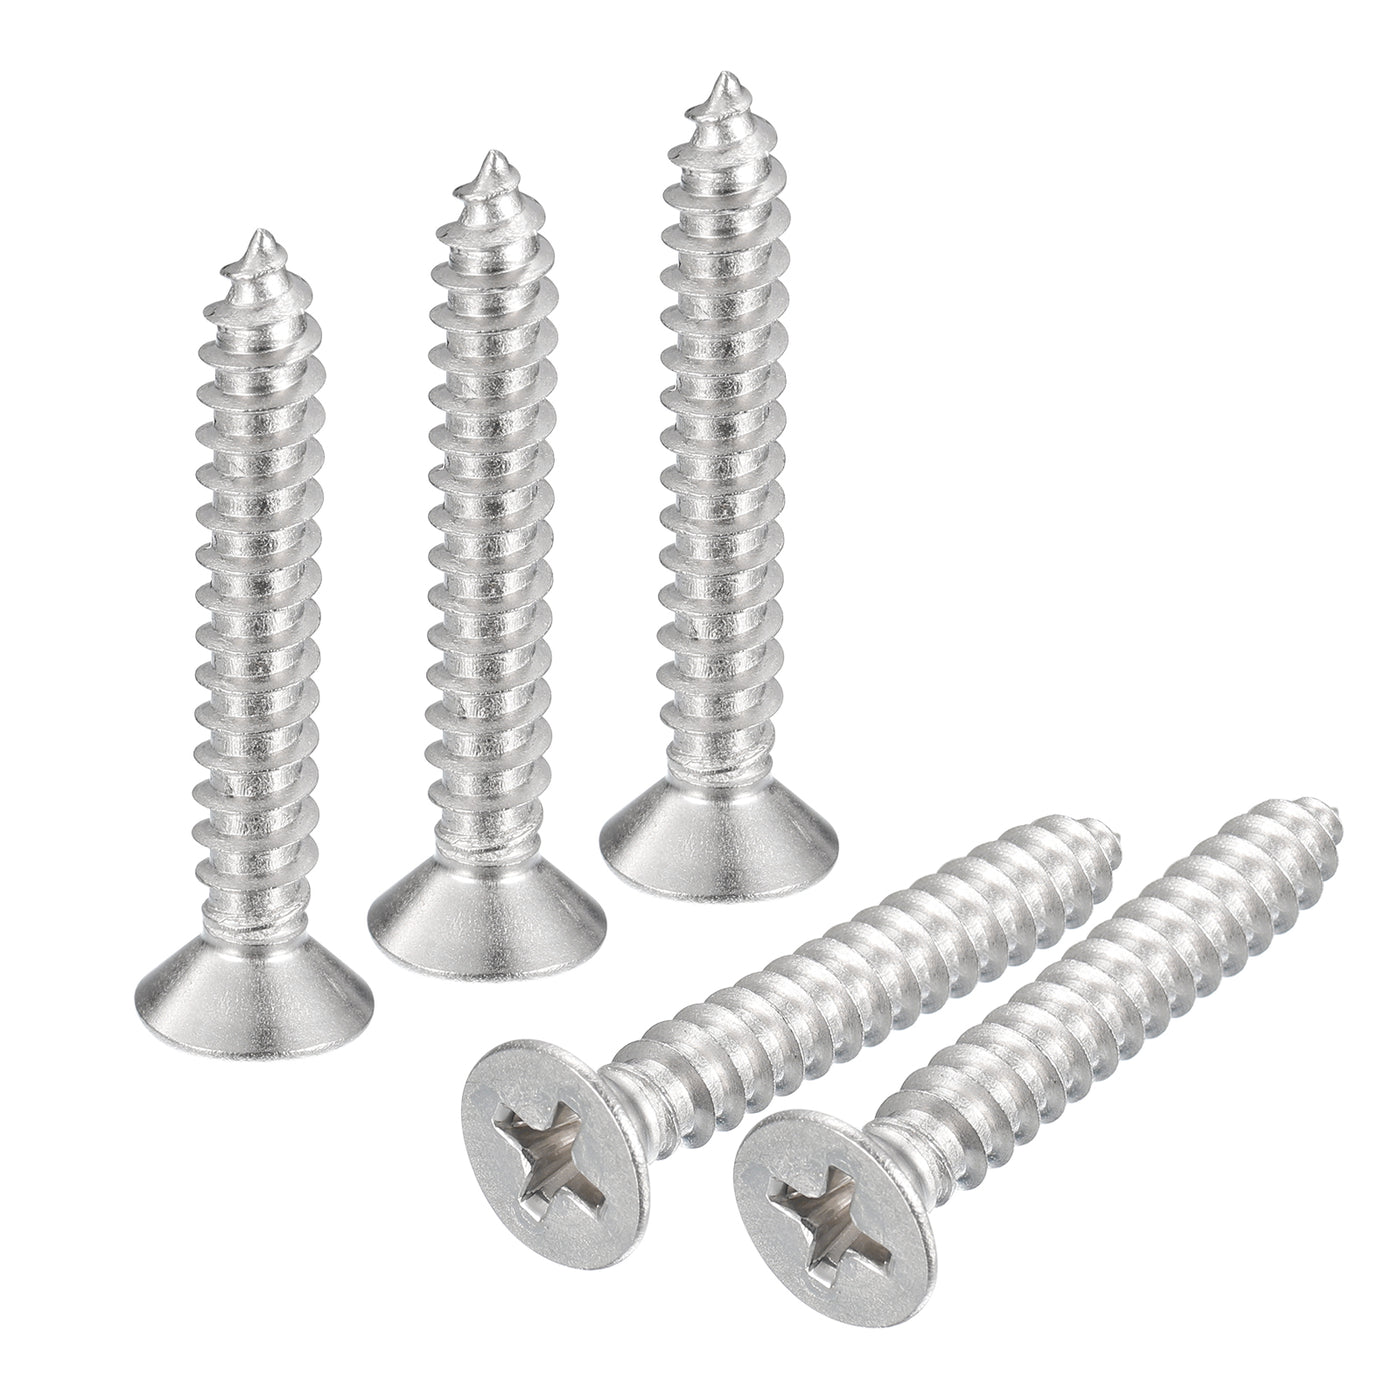 uxcell Uxcell #10x1-1/4" Wood Screws, 25pcs Phillips Self Tapping Screws 304 Stainless Steel